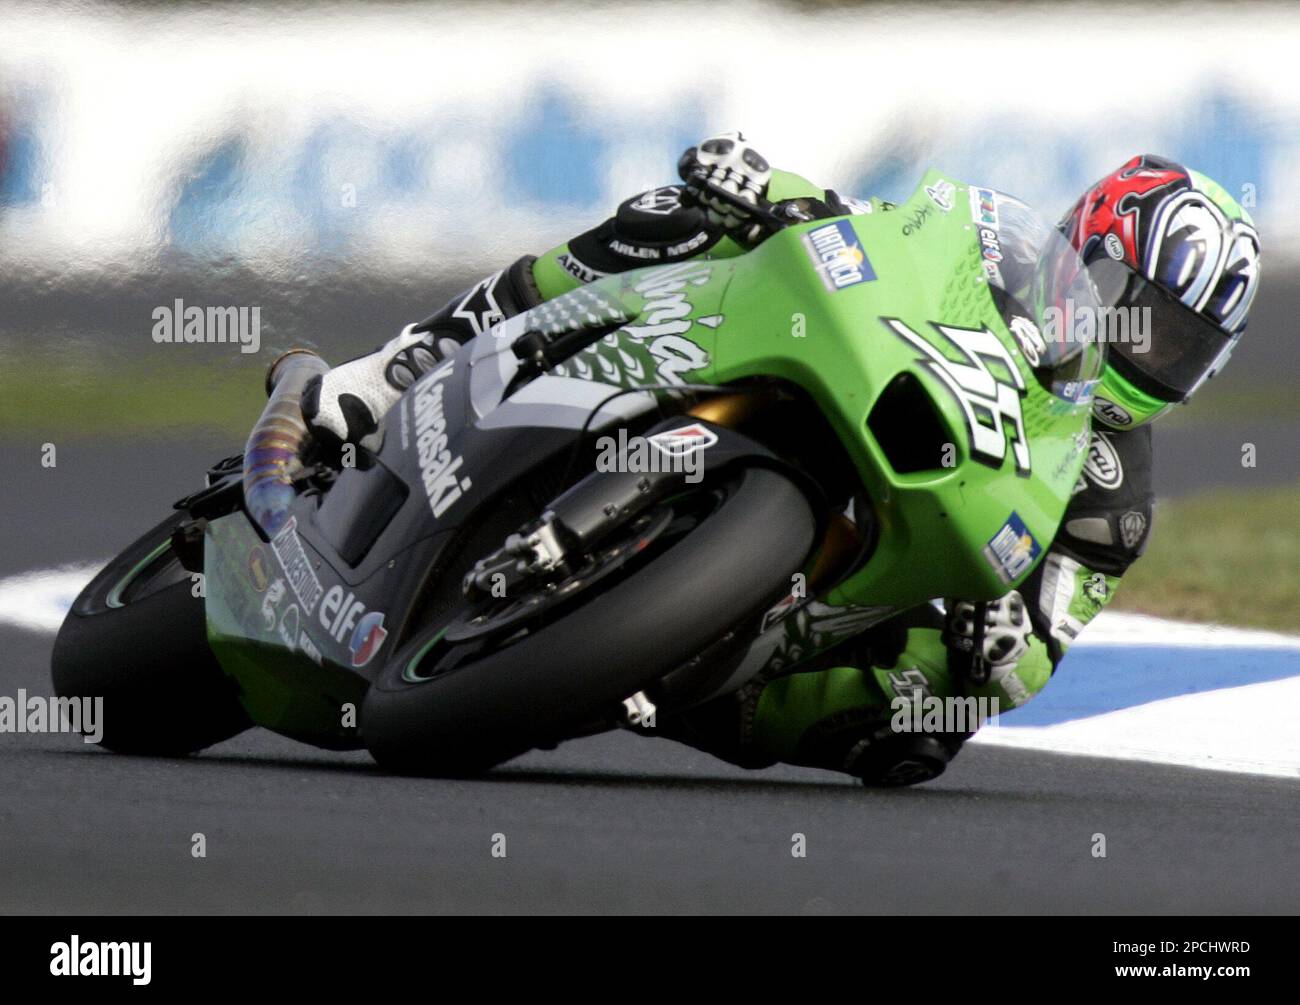 Japanese Moto GP rider Shinya Nakano scrapes the ground as he gets low into  turn 12 during the second practice session at Phillip Island, Australia,  Friday, Sept. 15, 2006, before the start